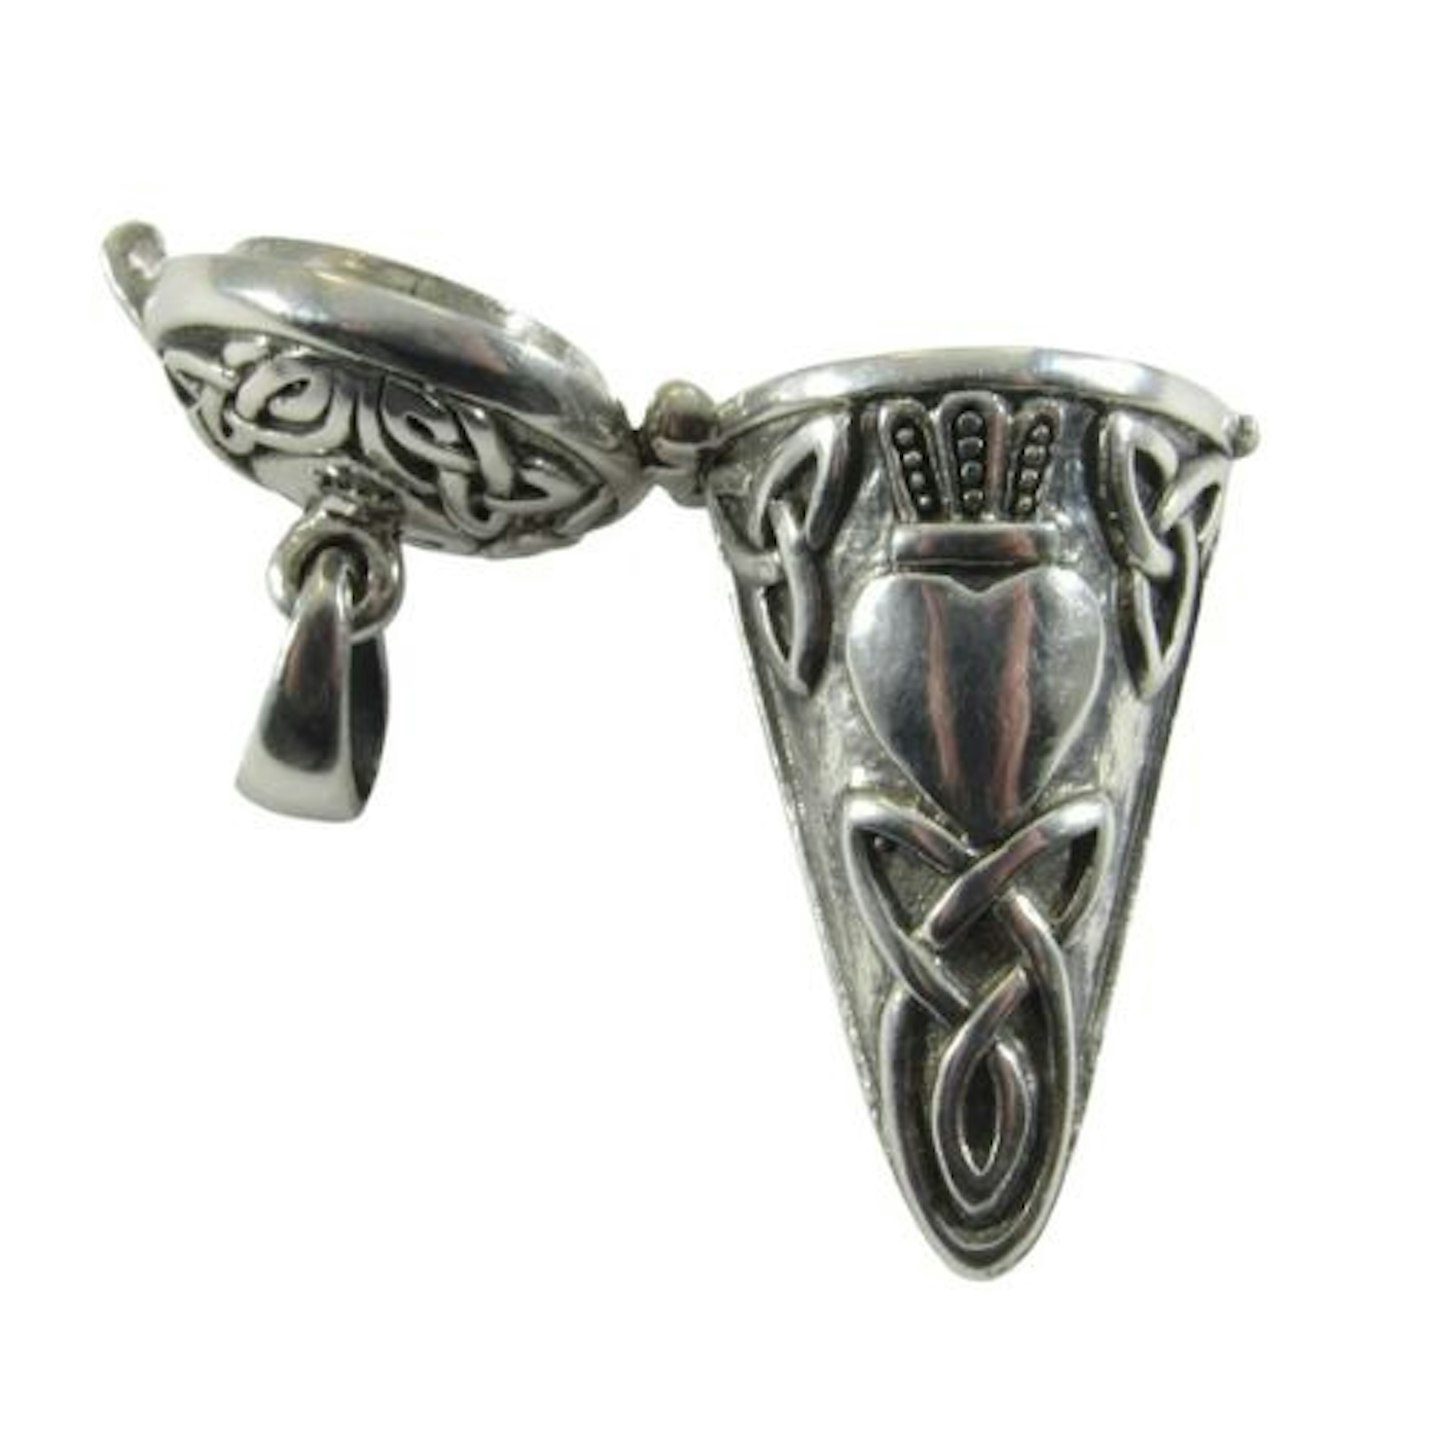 Solid 925 Sterling Silver Celtic Claddagh Pendulum with Lid, Handcrafted Magick Pendant for Spells & Potions